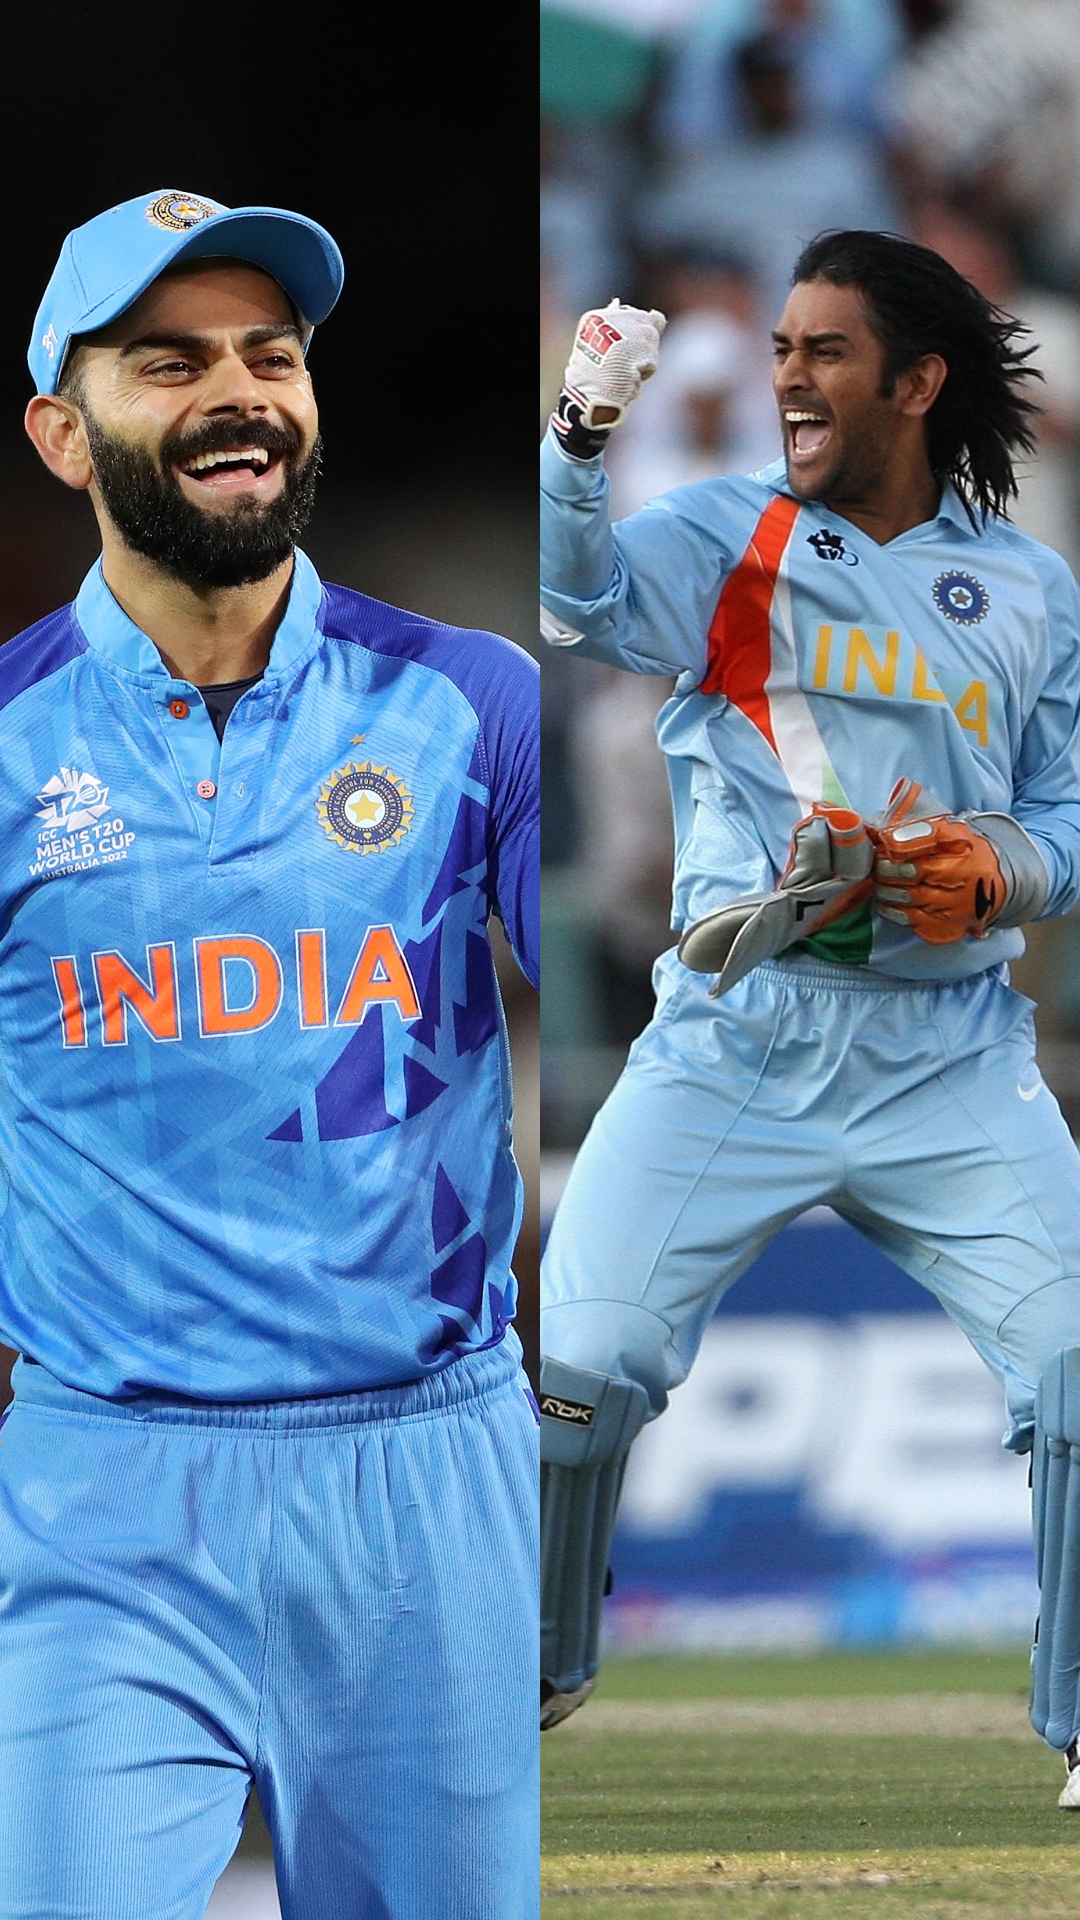 Indian captains to lead in IND vs PAK ODI World Cup matches from 1992 onwards
